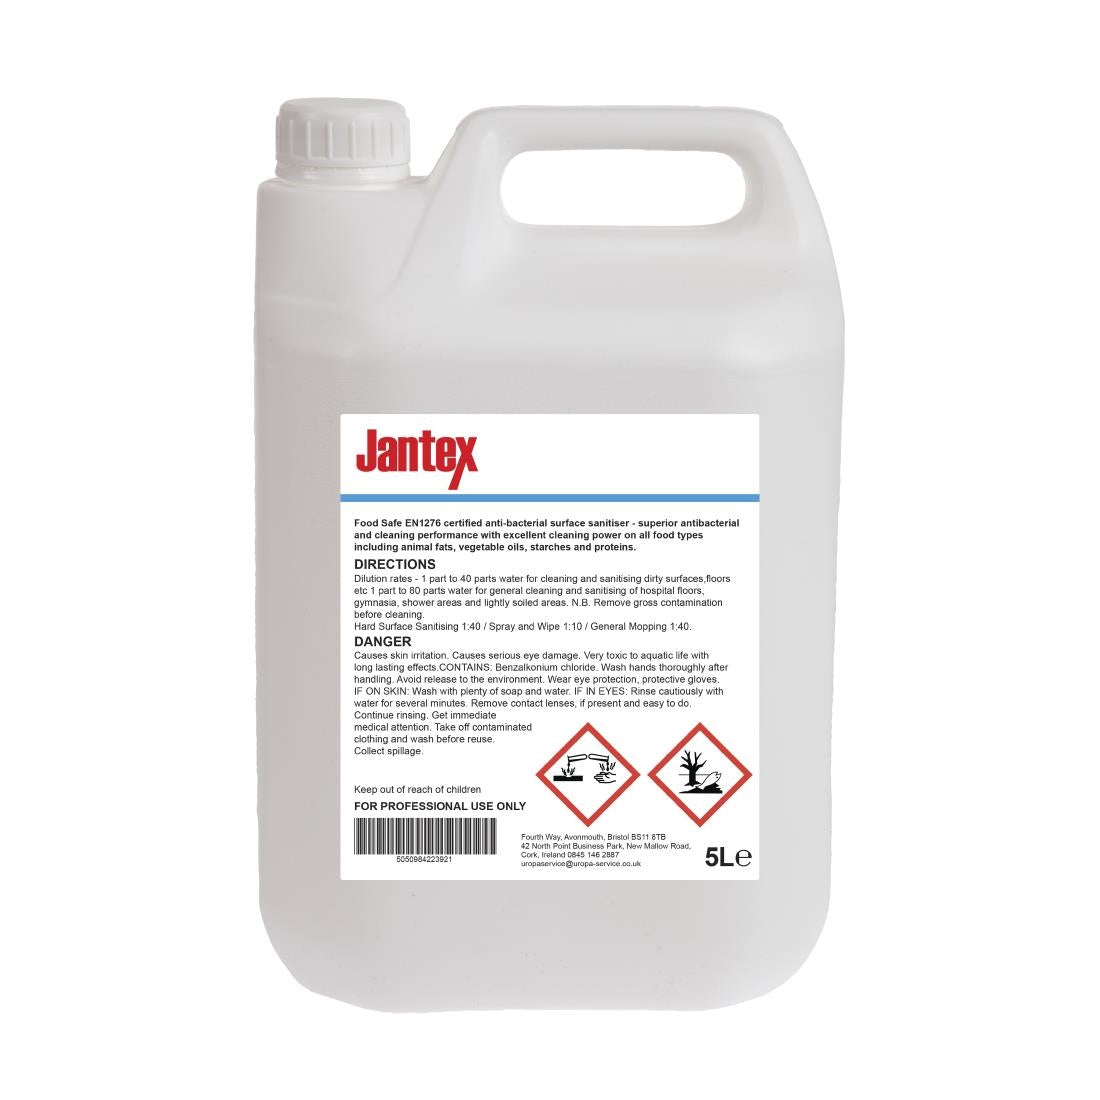 CF969 Jantex Kitchen Cleaner and Sanitiser Concentrate 5Ltr JD Catering Equipment Solutions Ltd